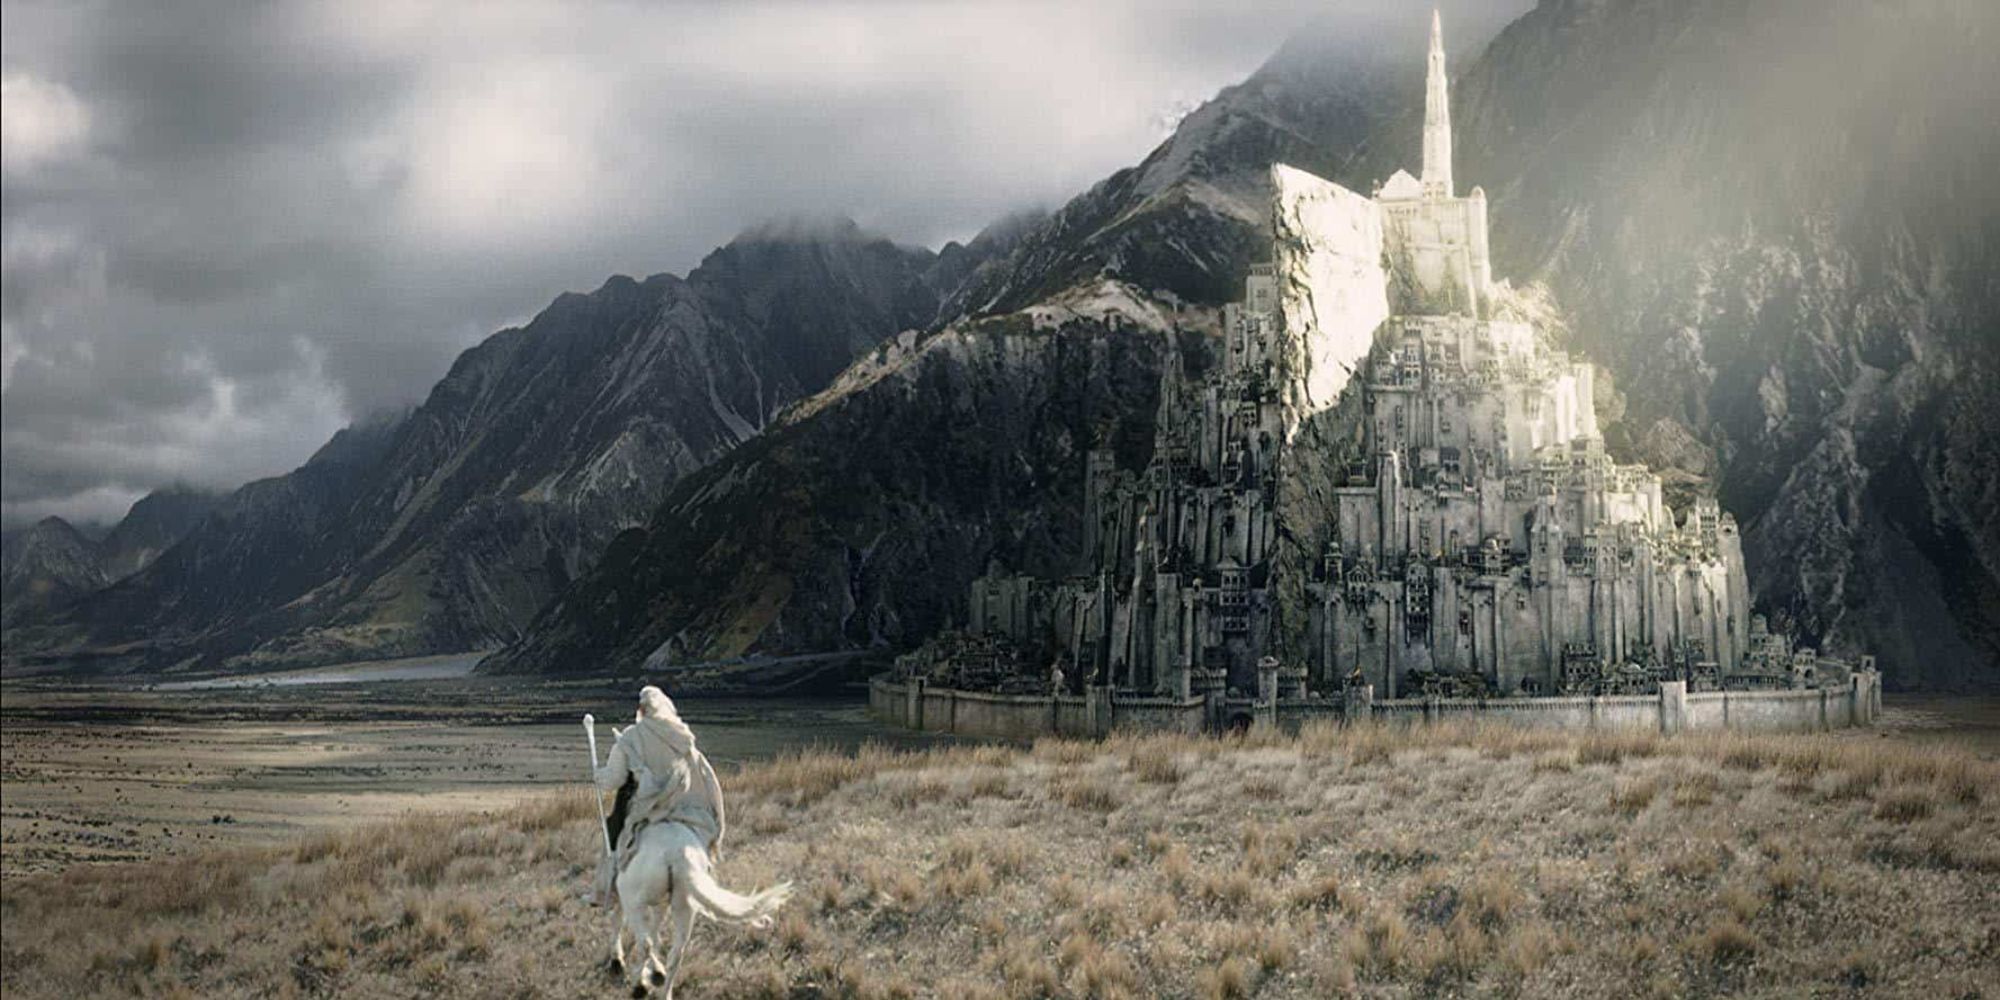 Gandalf riding towards Gondor in The Lord of the Rings: The Return of the King.